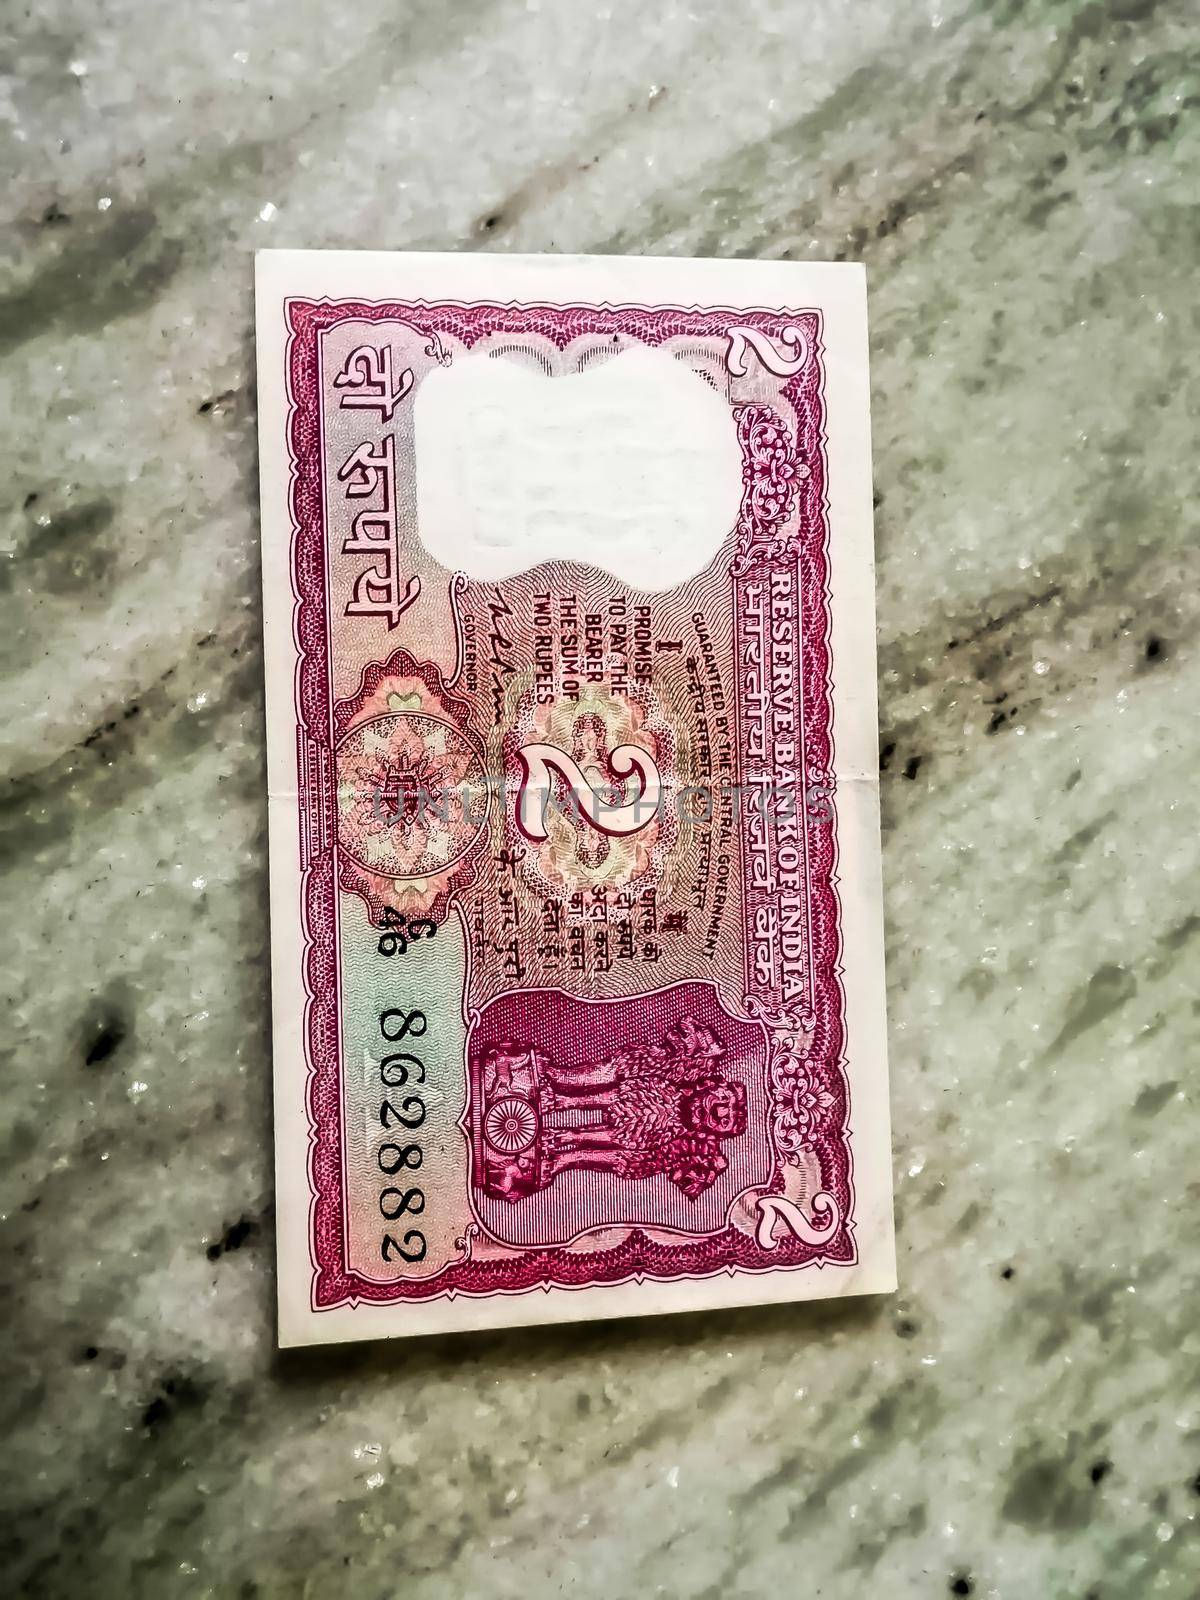 Indian Old Two rupees currency note. The Indian 2 rupee note, the second smallest Indian note. It was introduced in 1943 and removed from circulation in 1995.